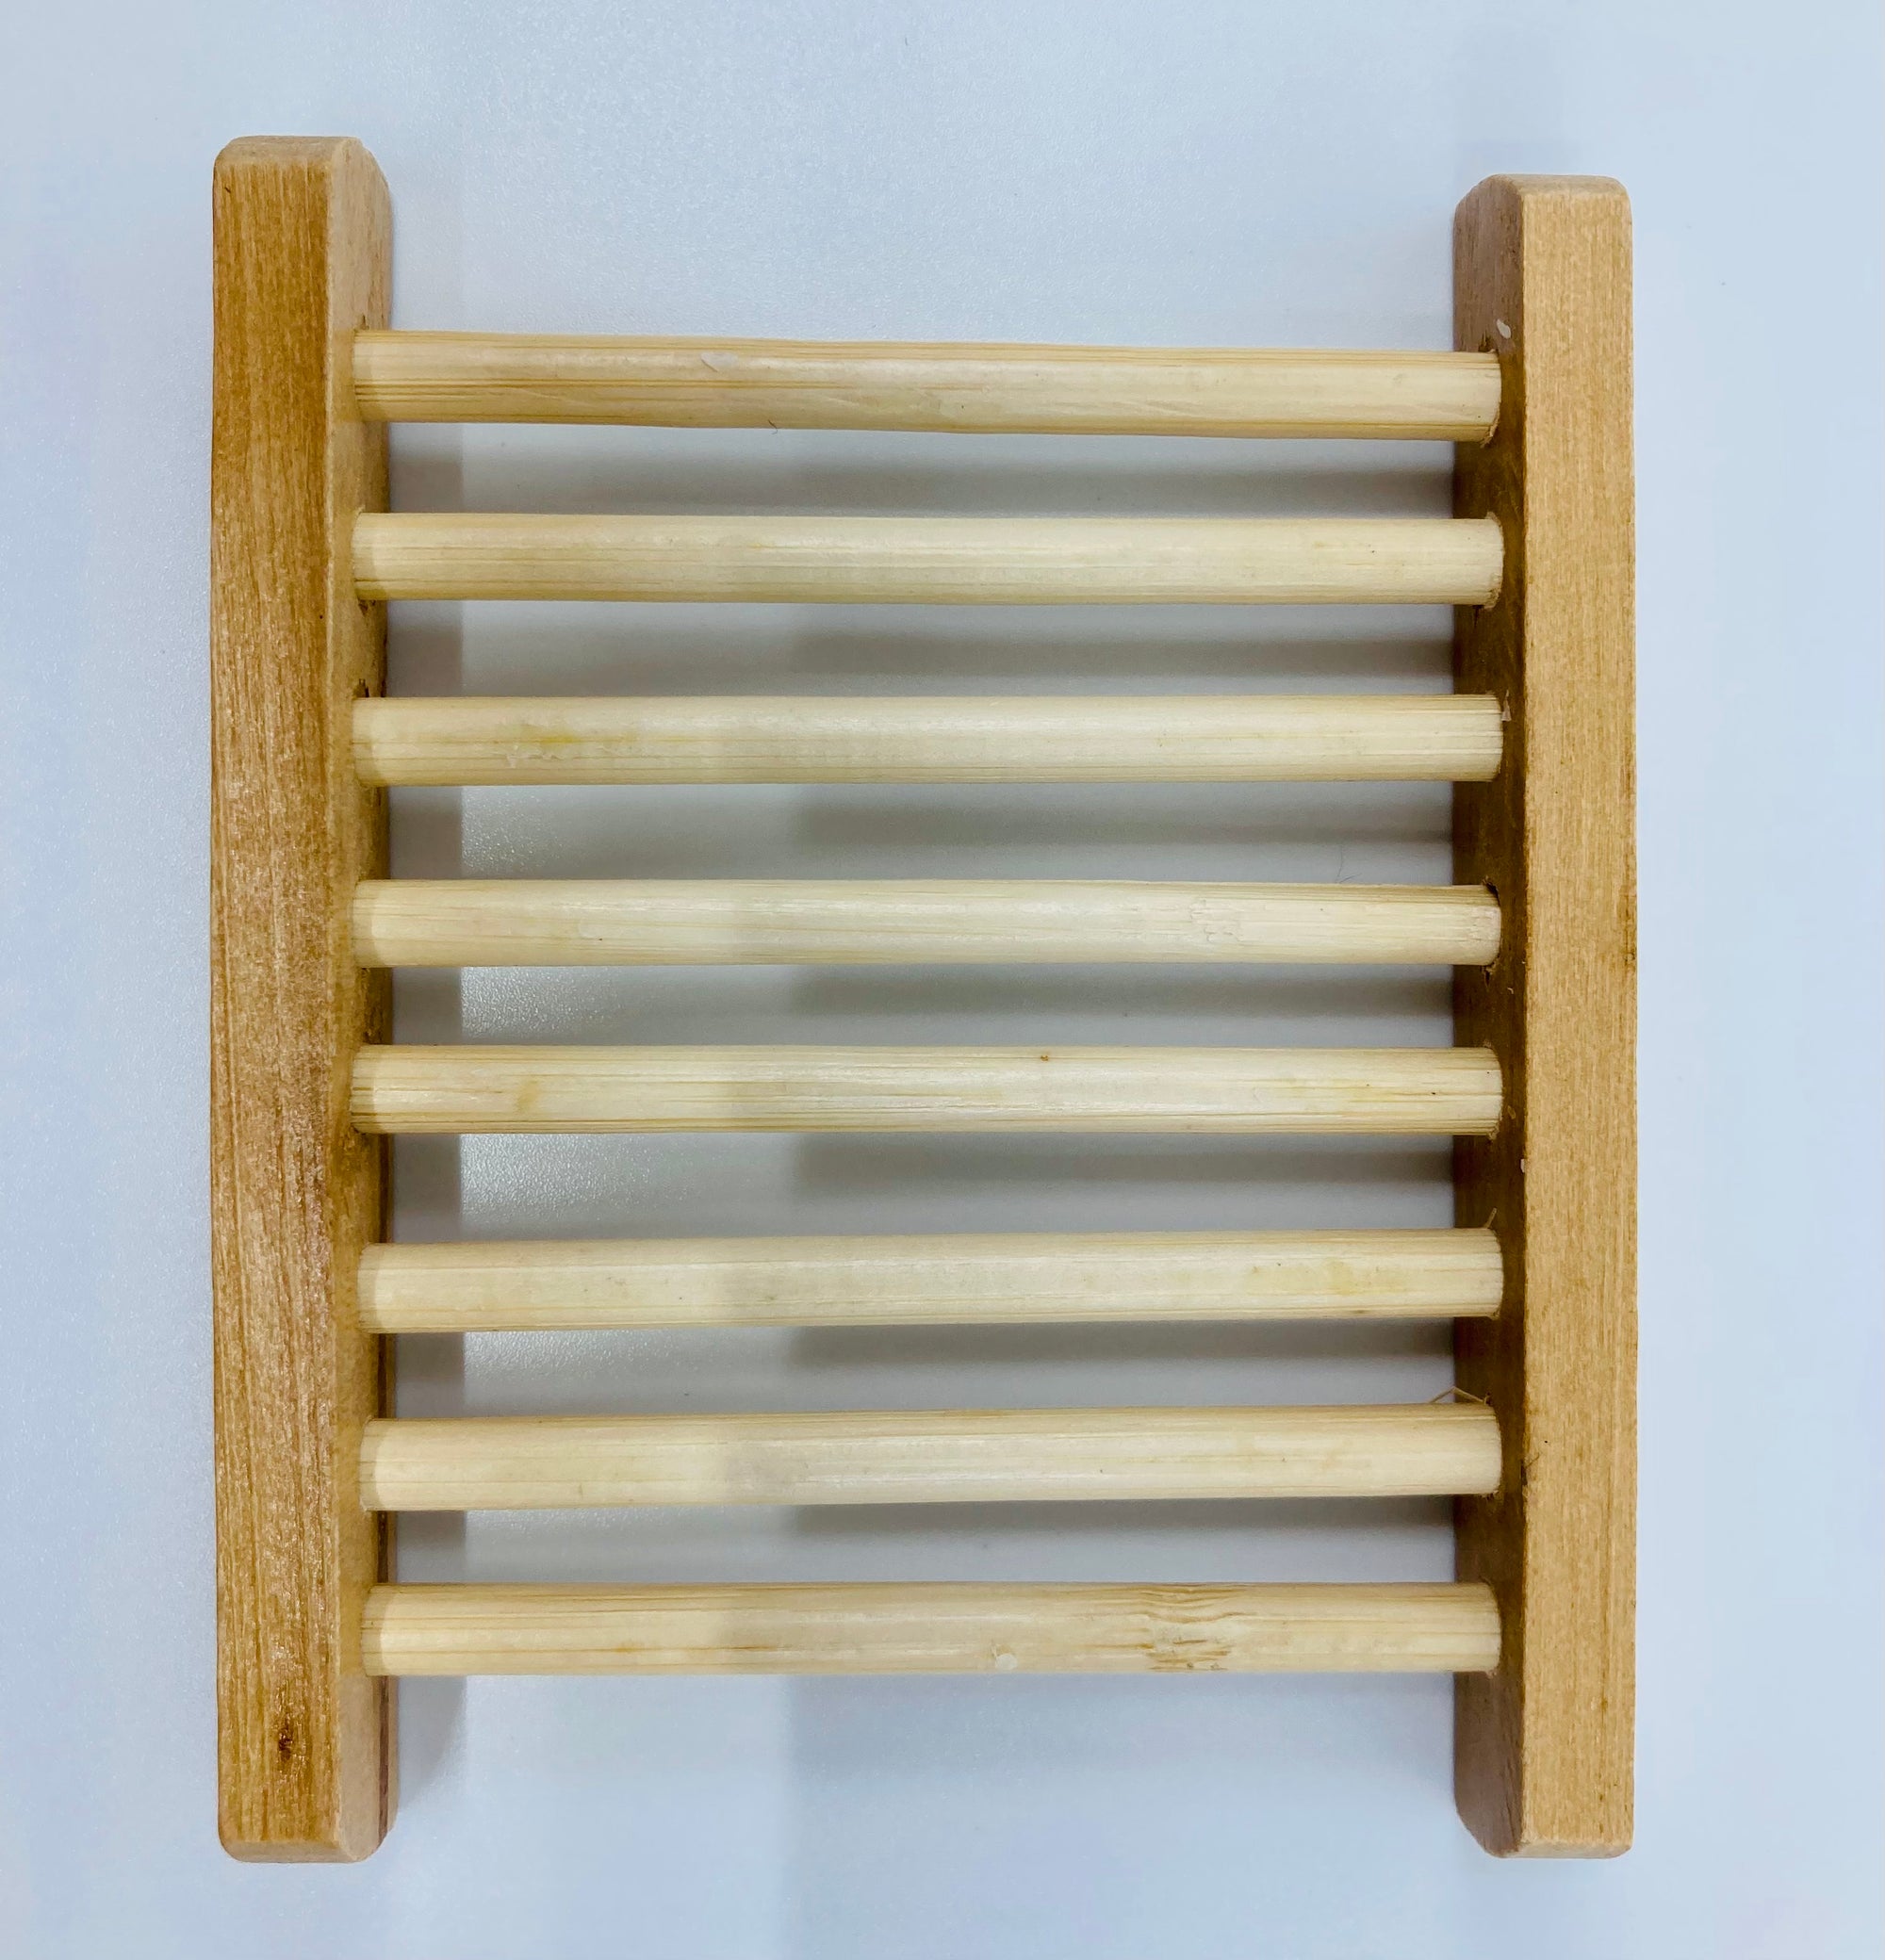 A top view of the bamboo soap dish.